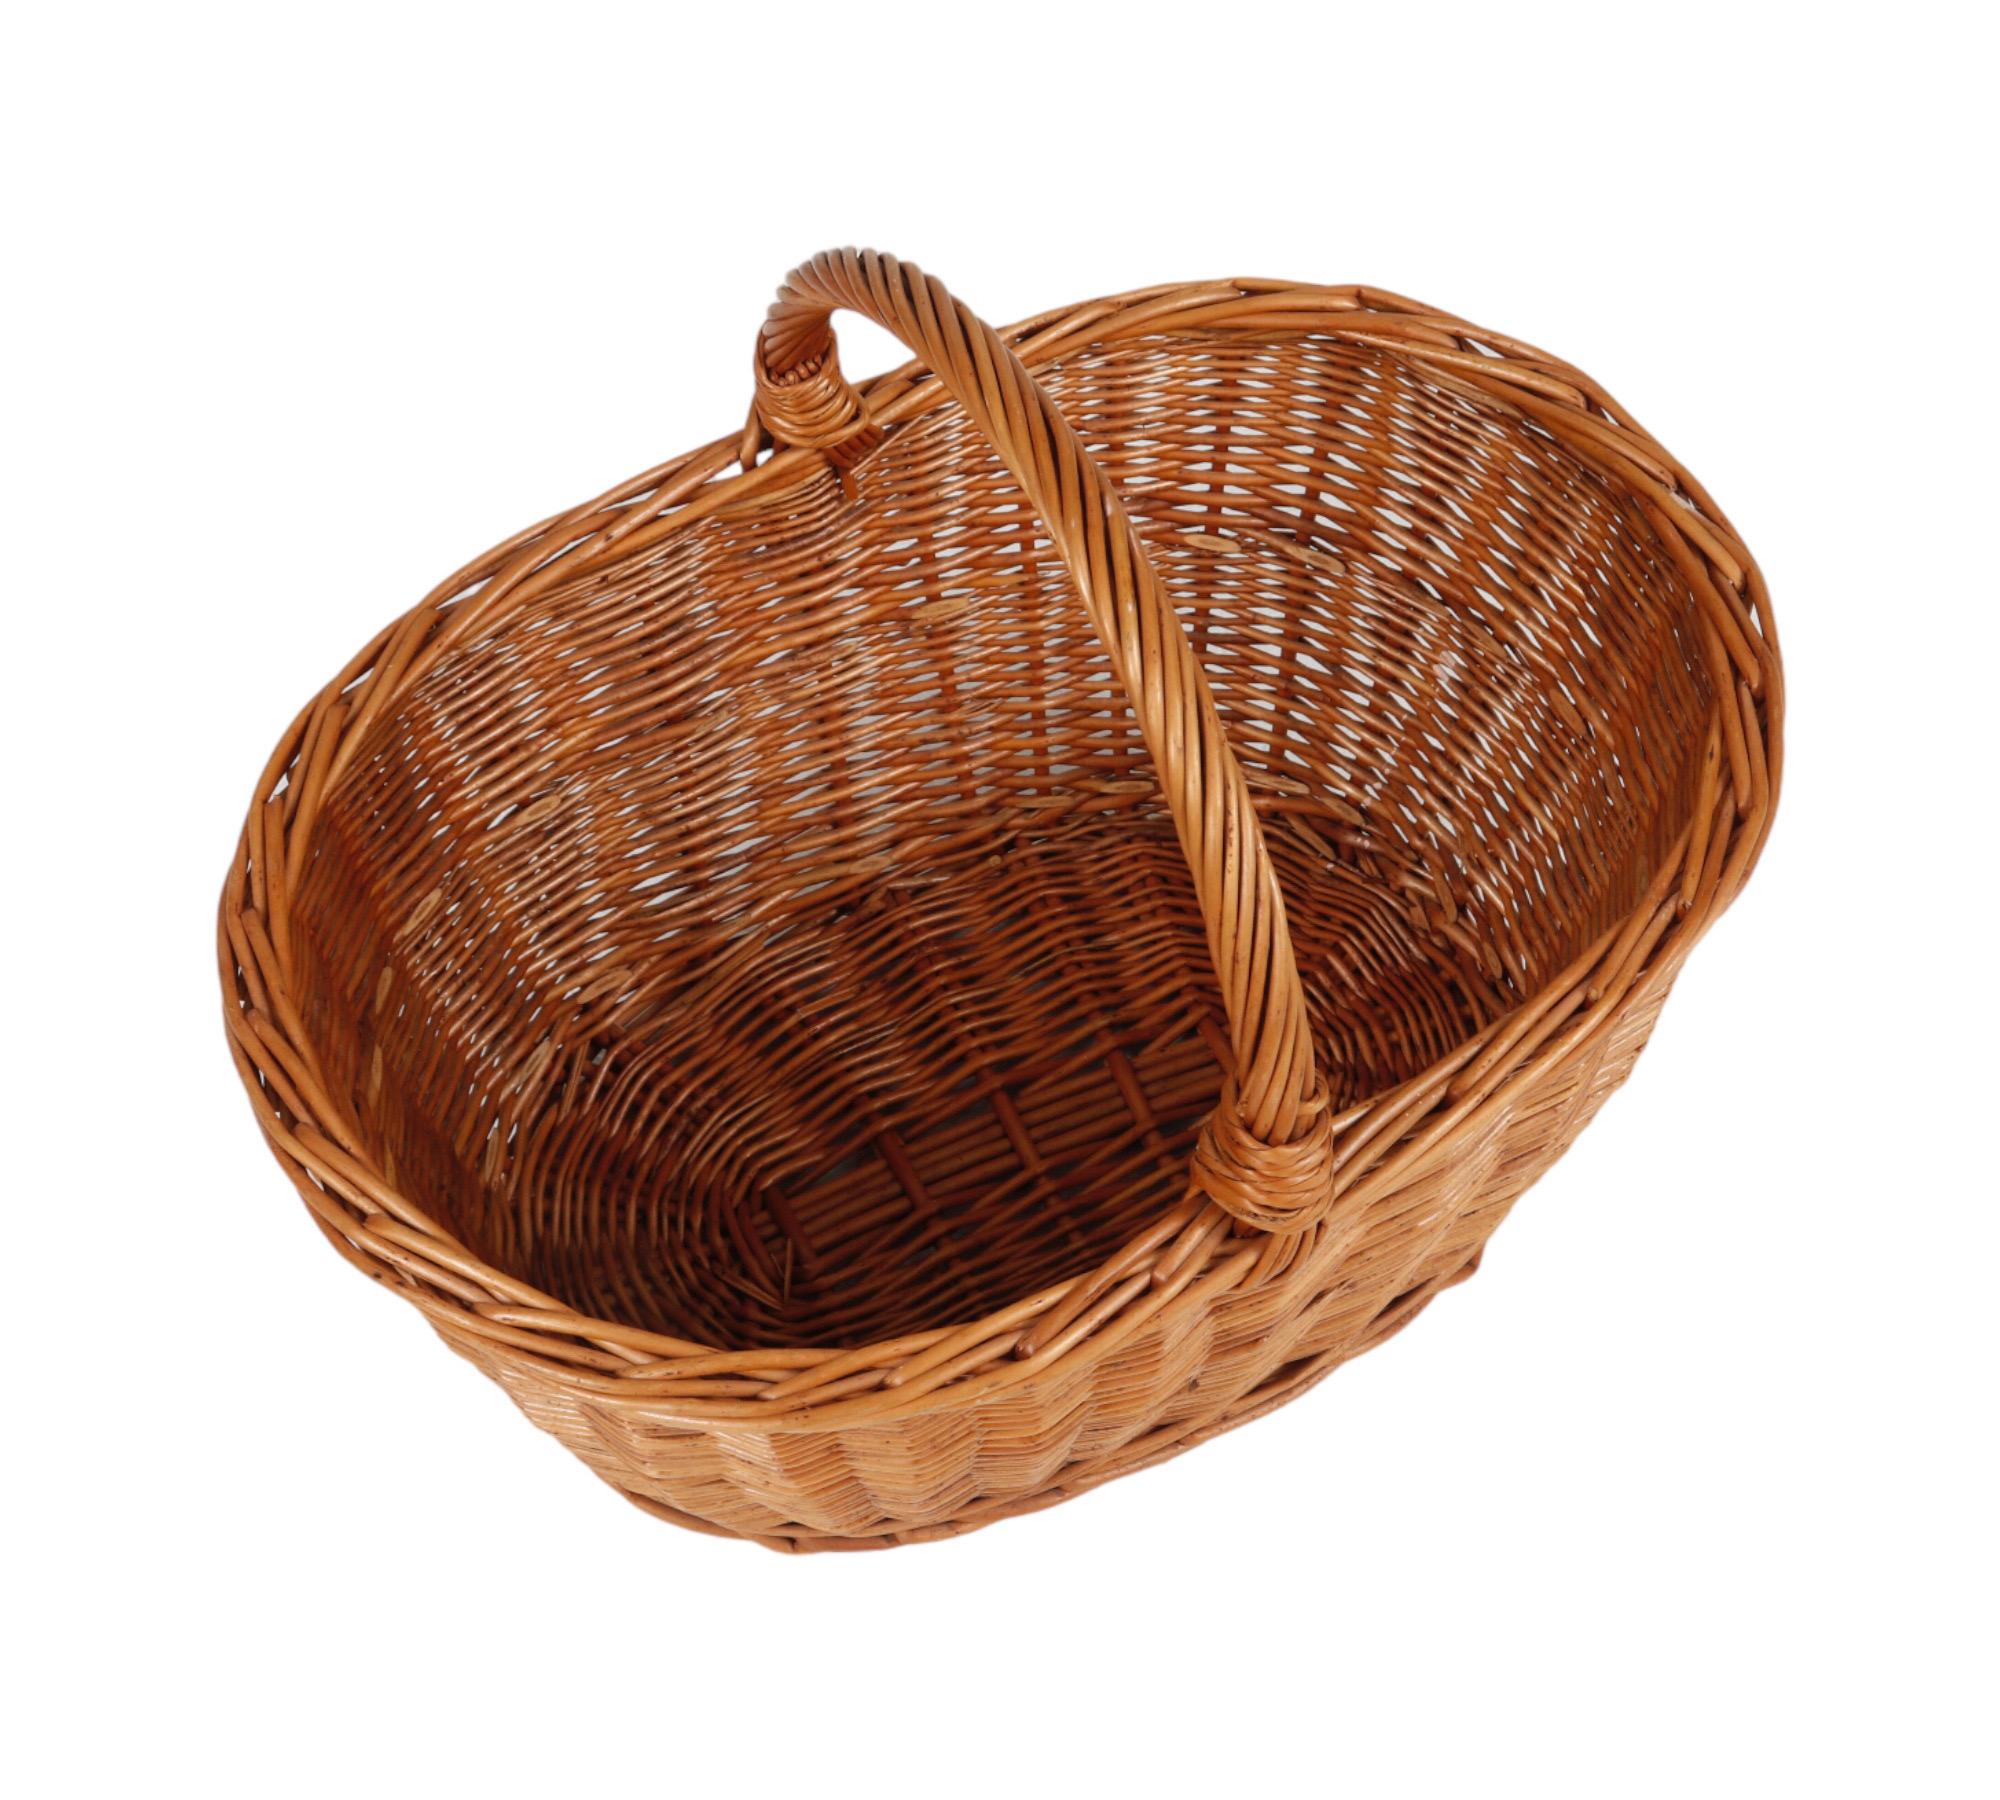 French Wicker Shopping Basket In Good Condition For Sale In Bradenton, FL